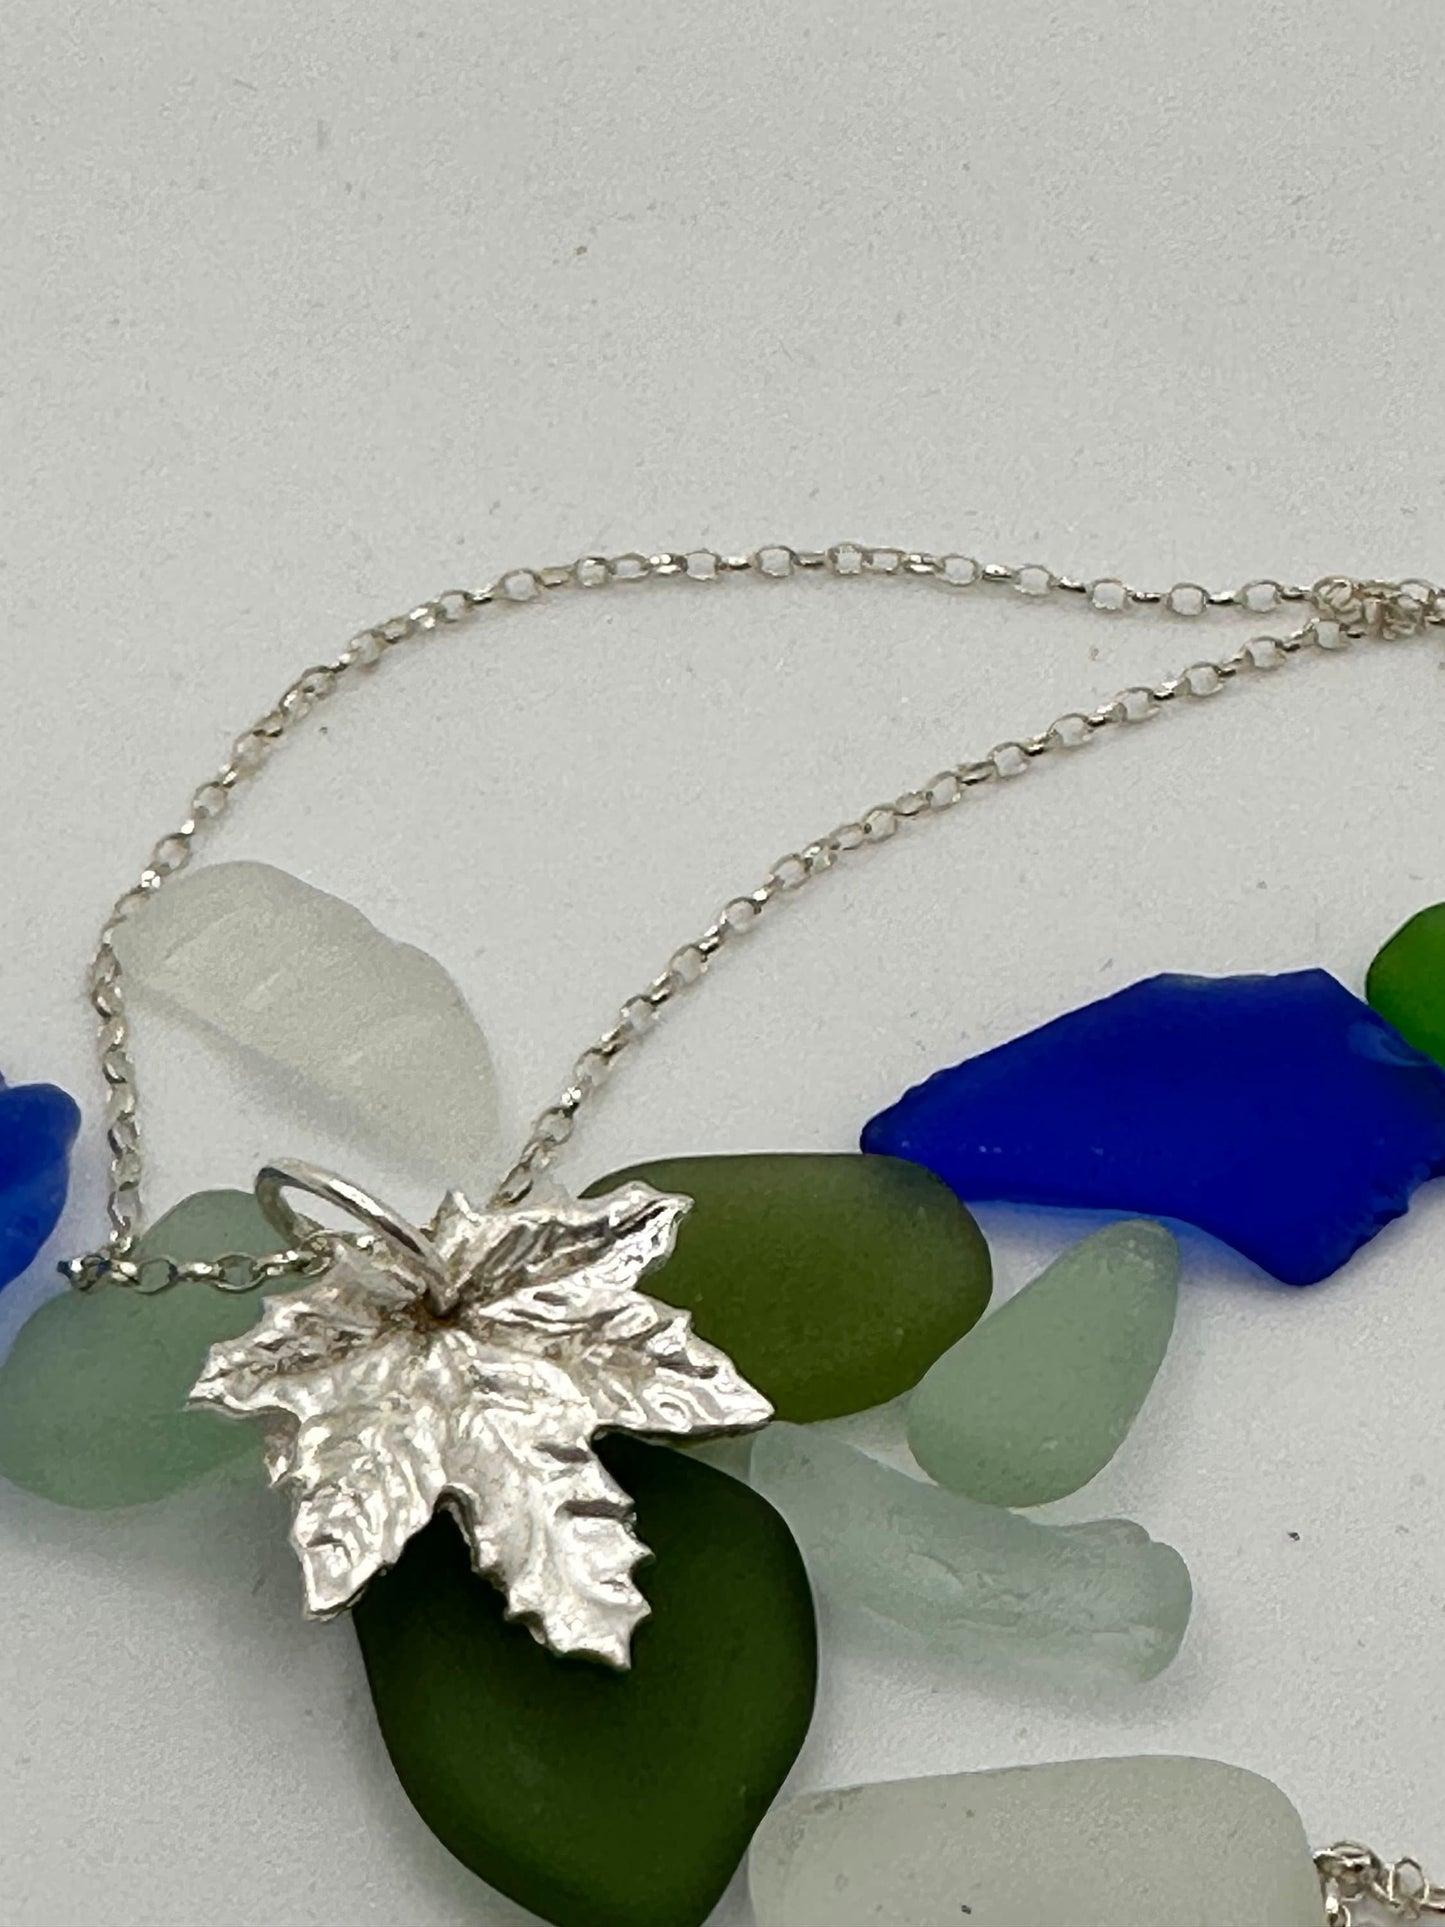 999 silver maple leaf pendant and sterling silver chain, maple leaf, silver maple leaf, handmade